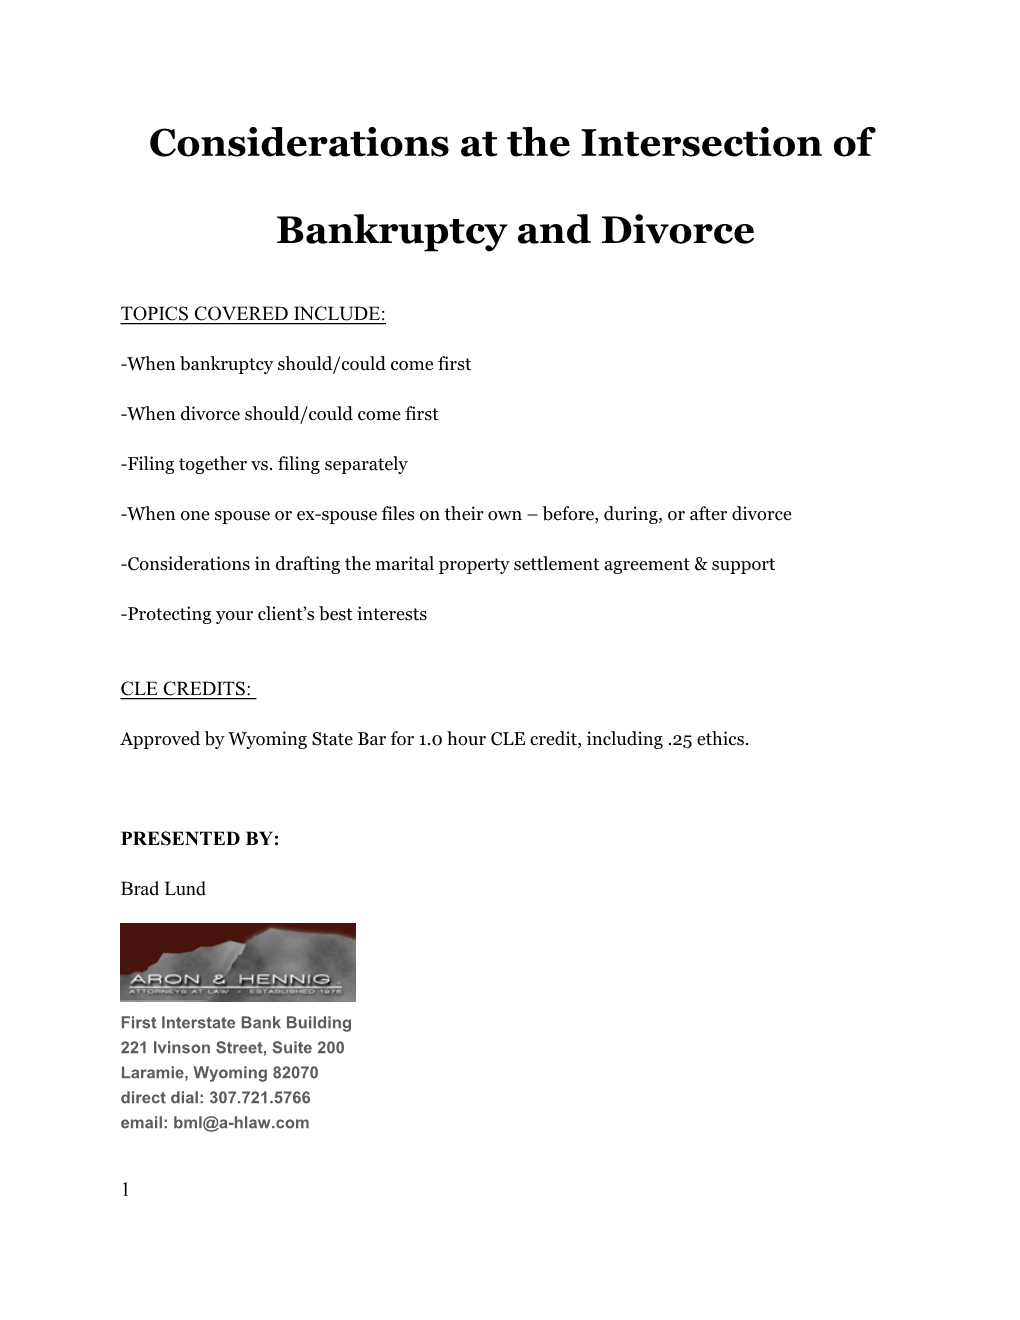 Considerations at the Intersection of Bankruptcy and Divorce